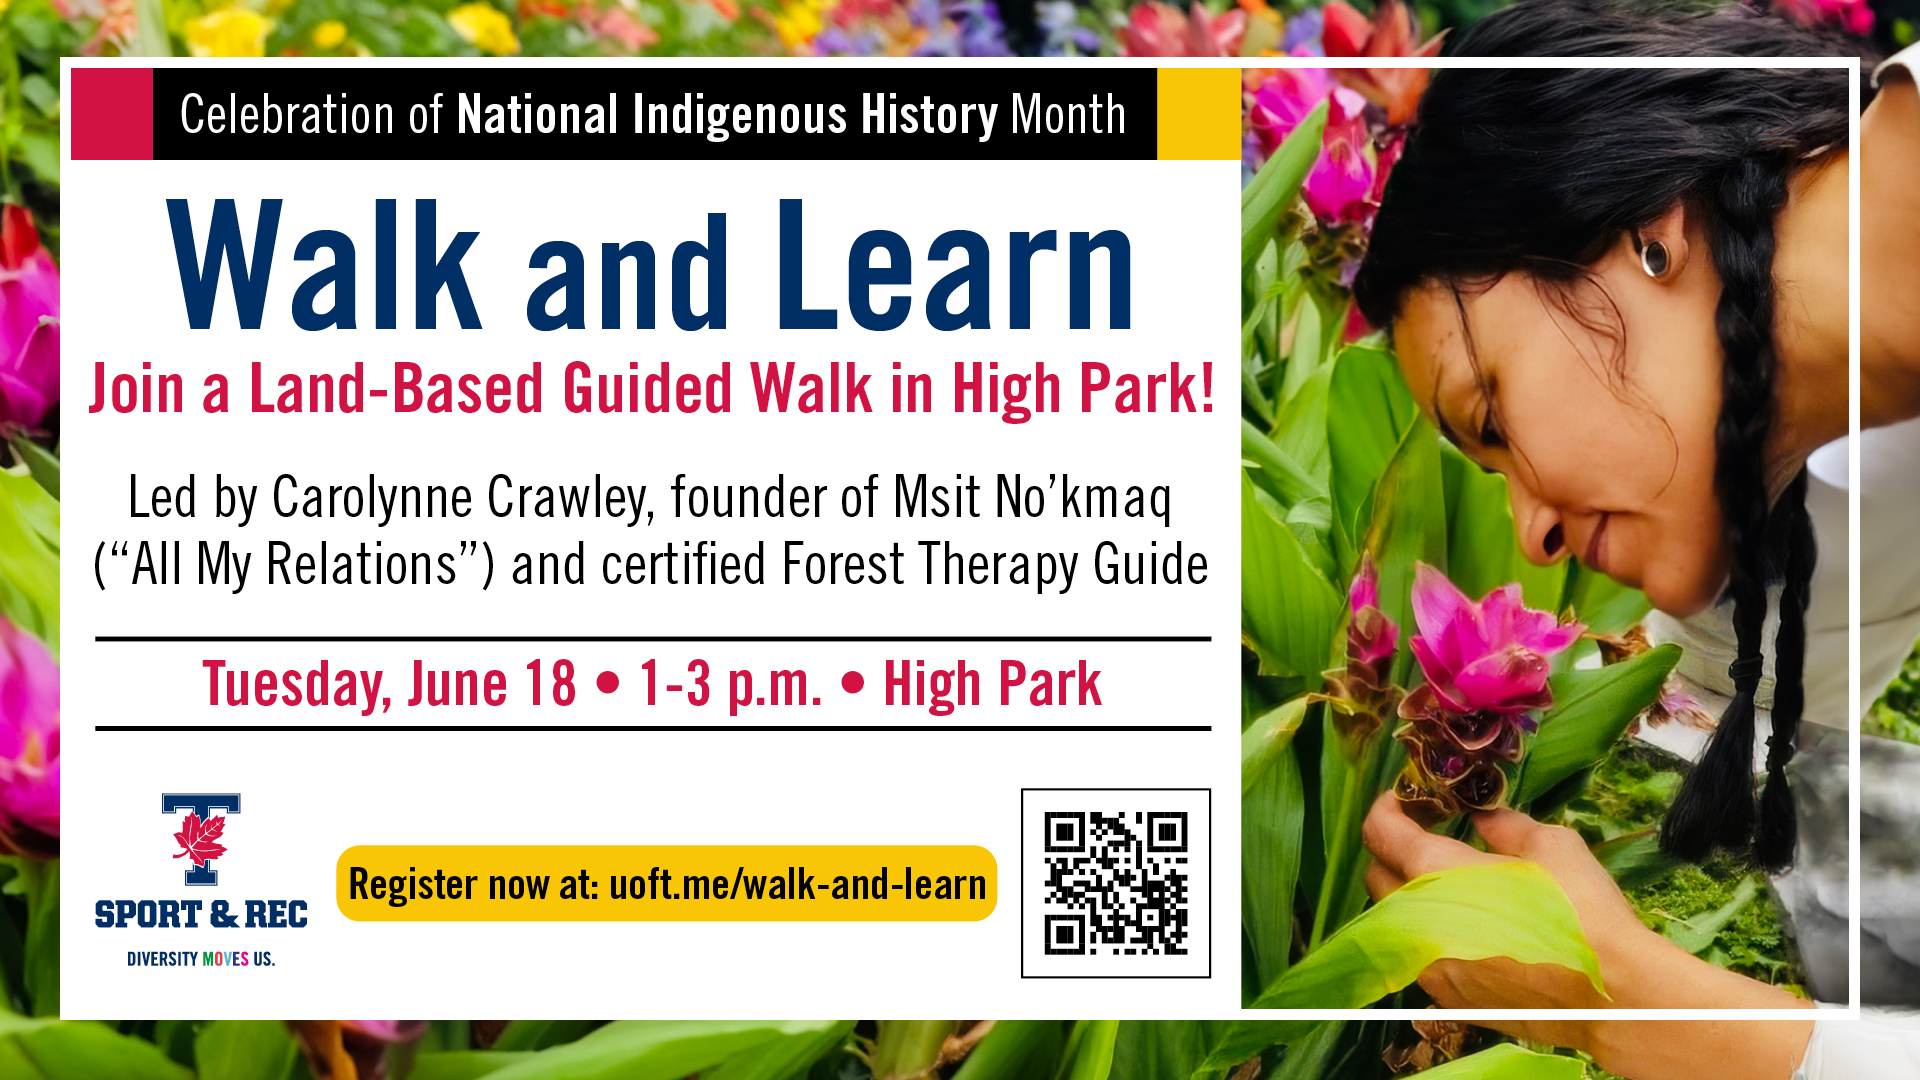 Join Walk and Learn in High Park, on June 18 from 1-3 p.m.